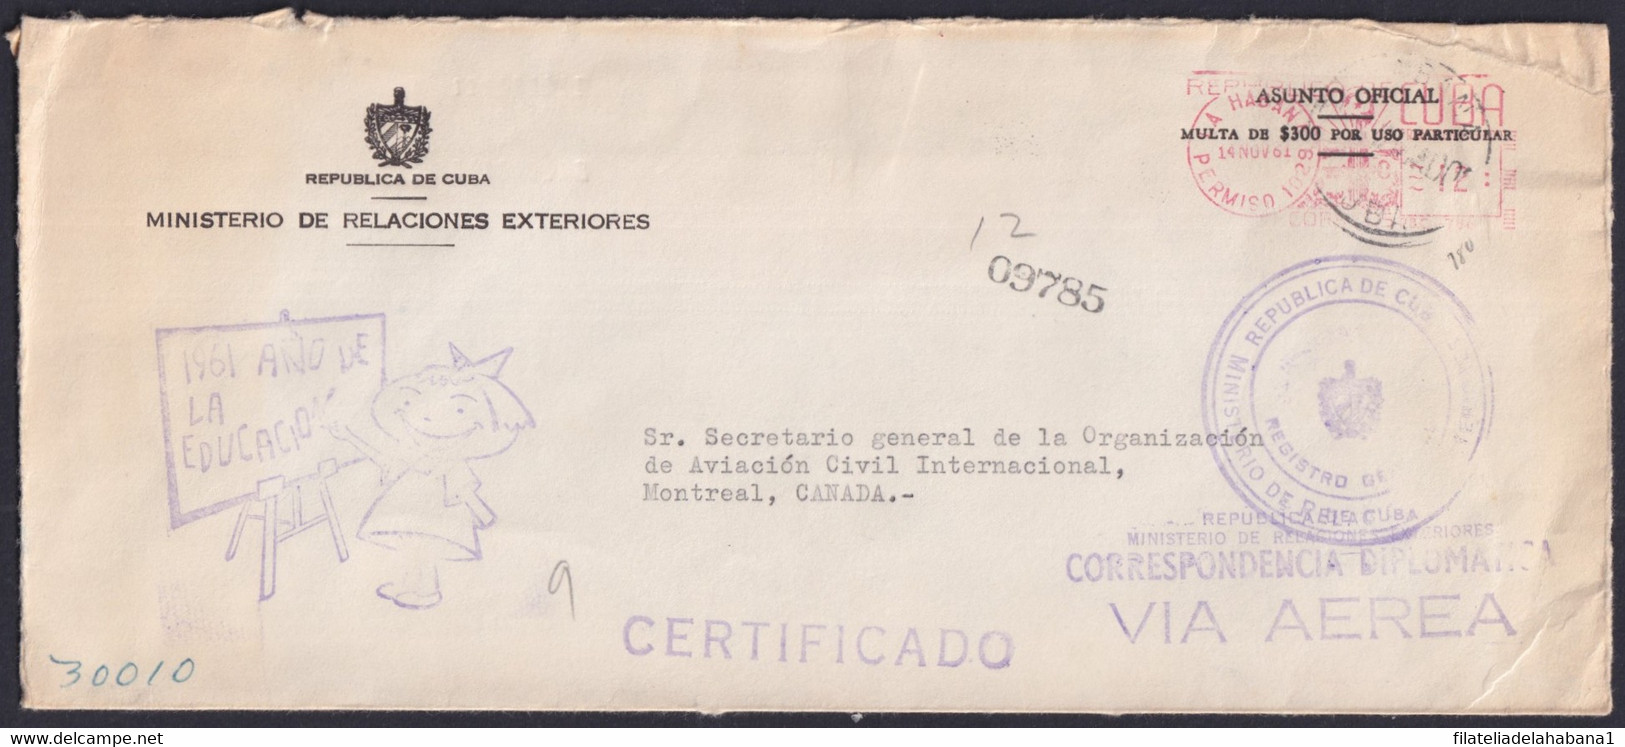 FM-141 CUBA LG2153 1961 PITNEY BOWES DIPLOMATIC COVER PERMISO 1029 MINREX EDUCATION SPECIAL CANCEL. - Franking Labels